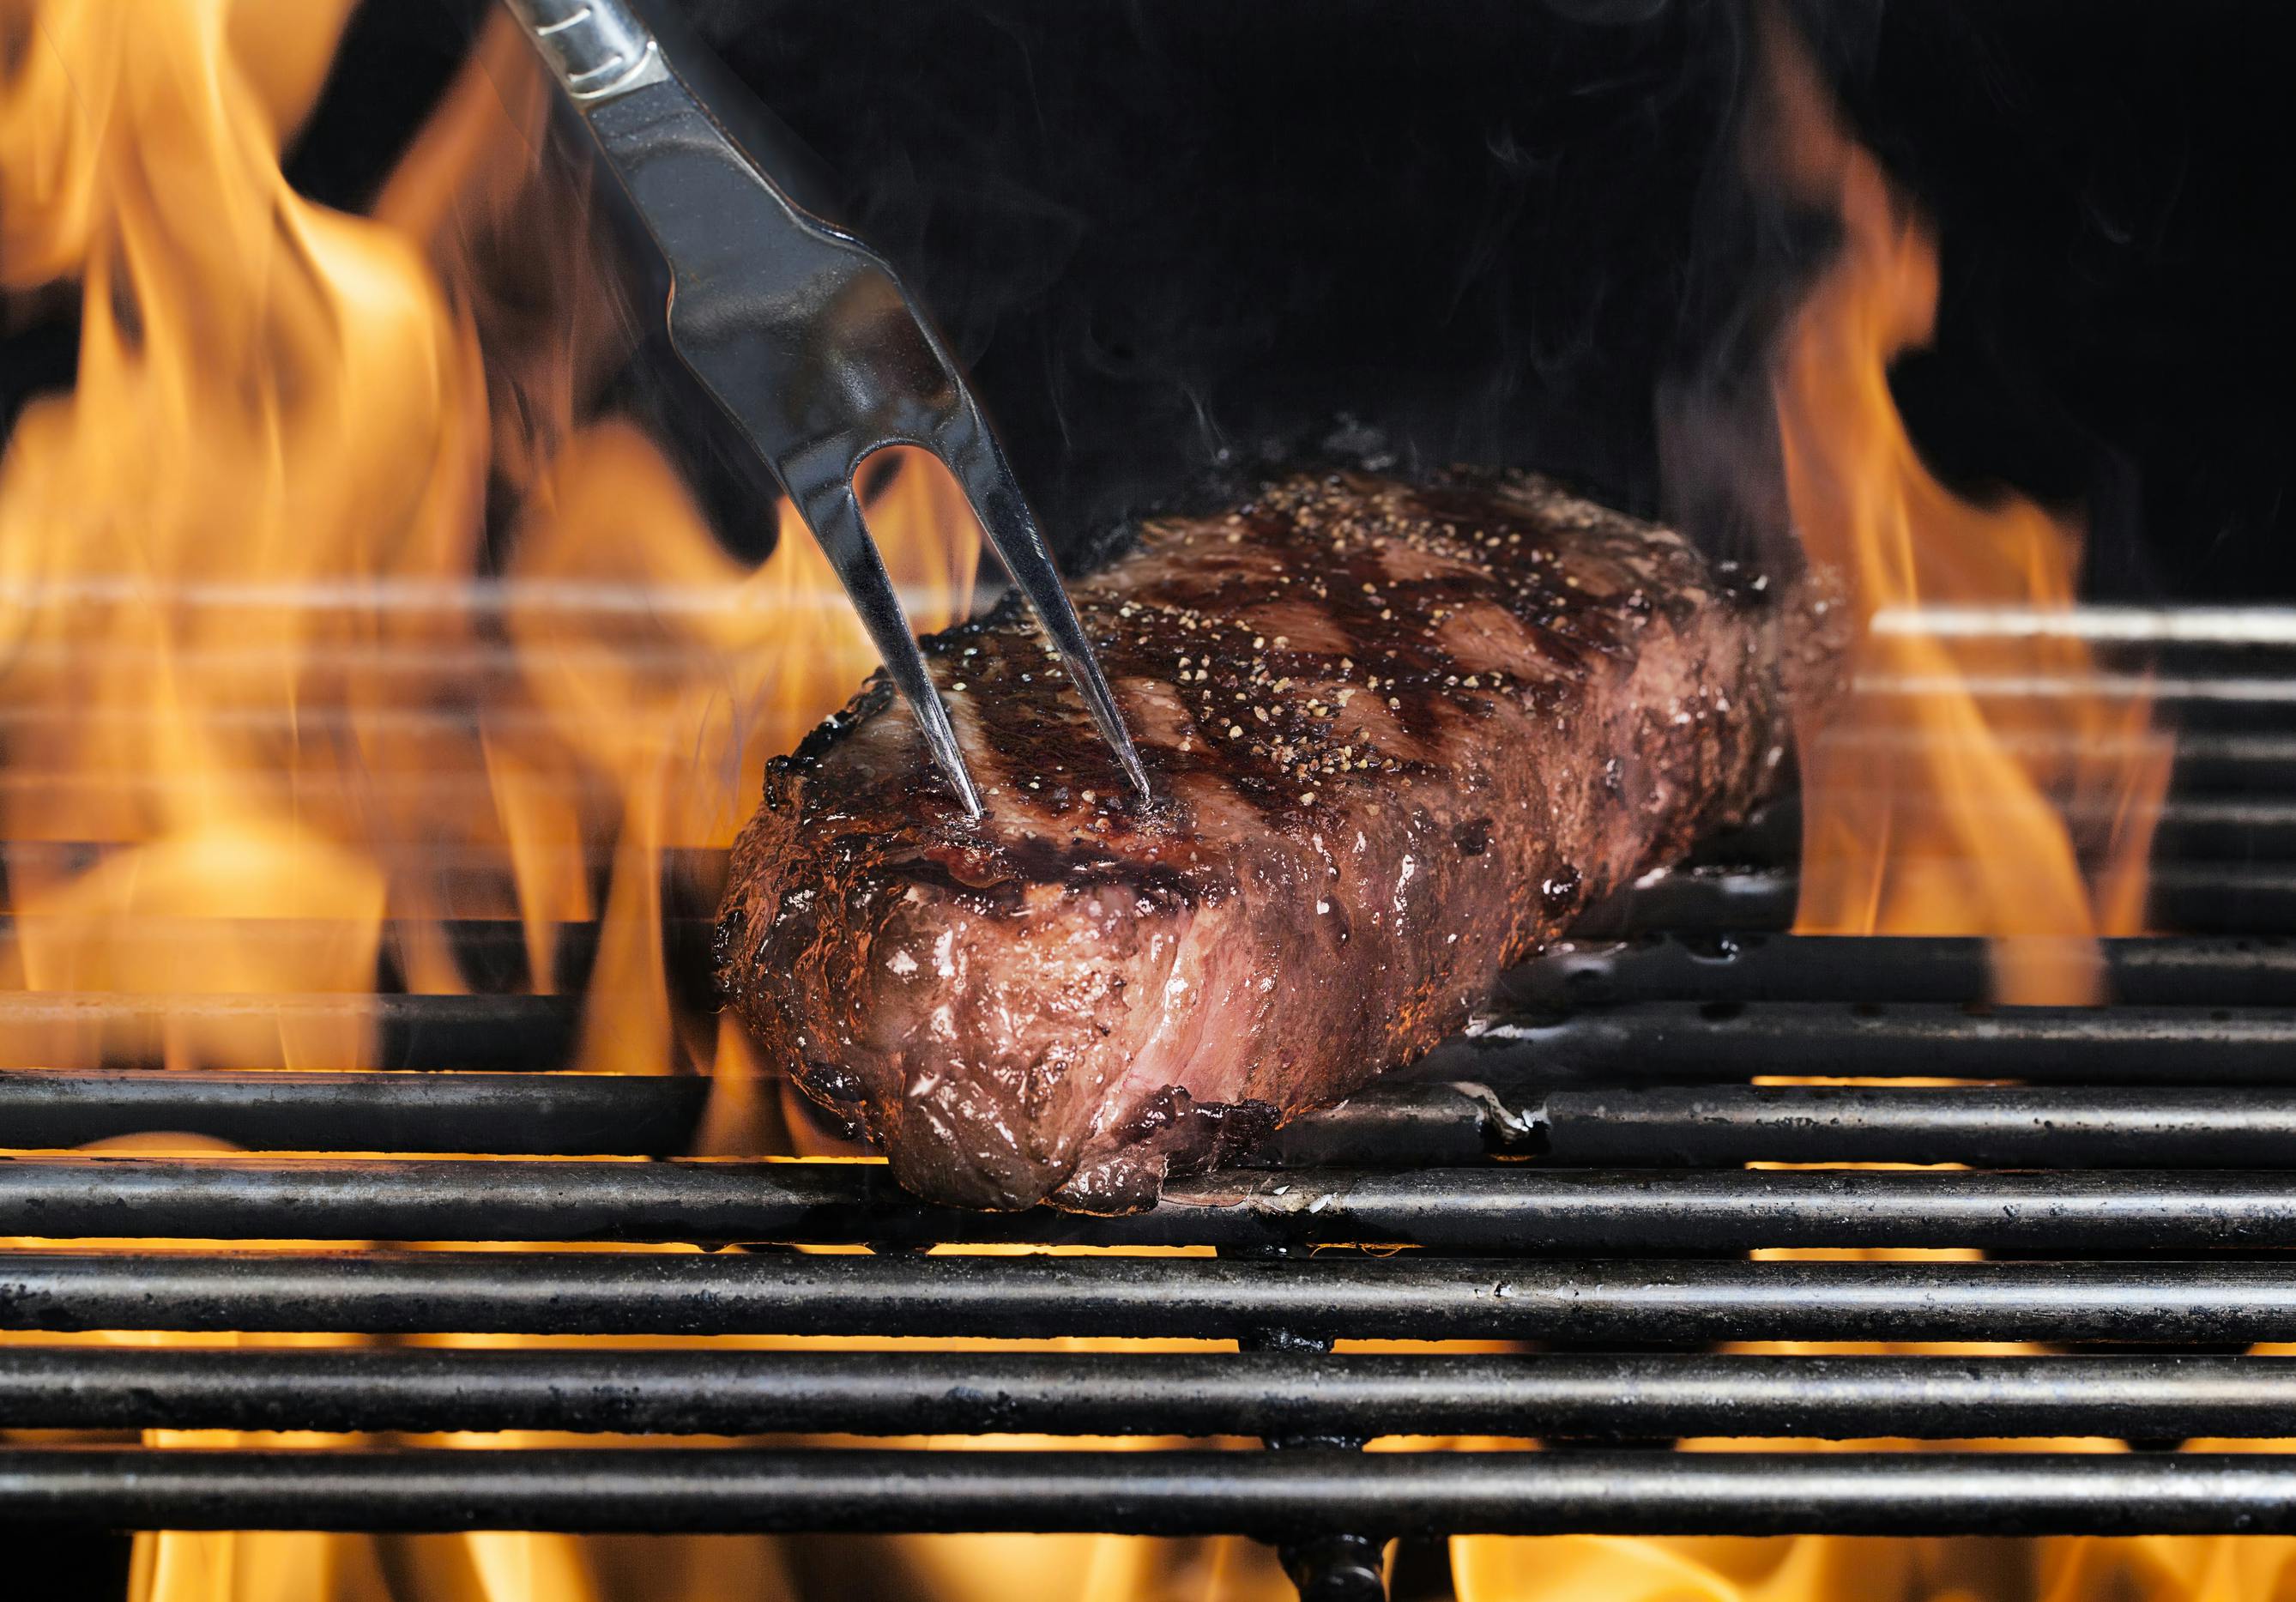 Steak on the grill, being poked with a fork as flame surround it.